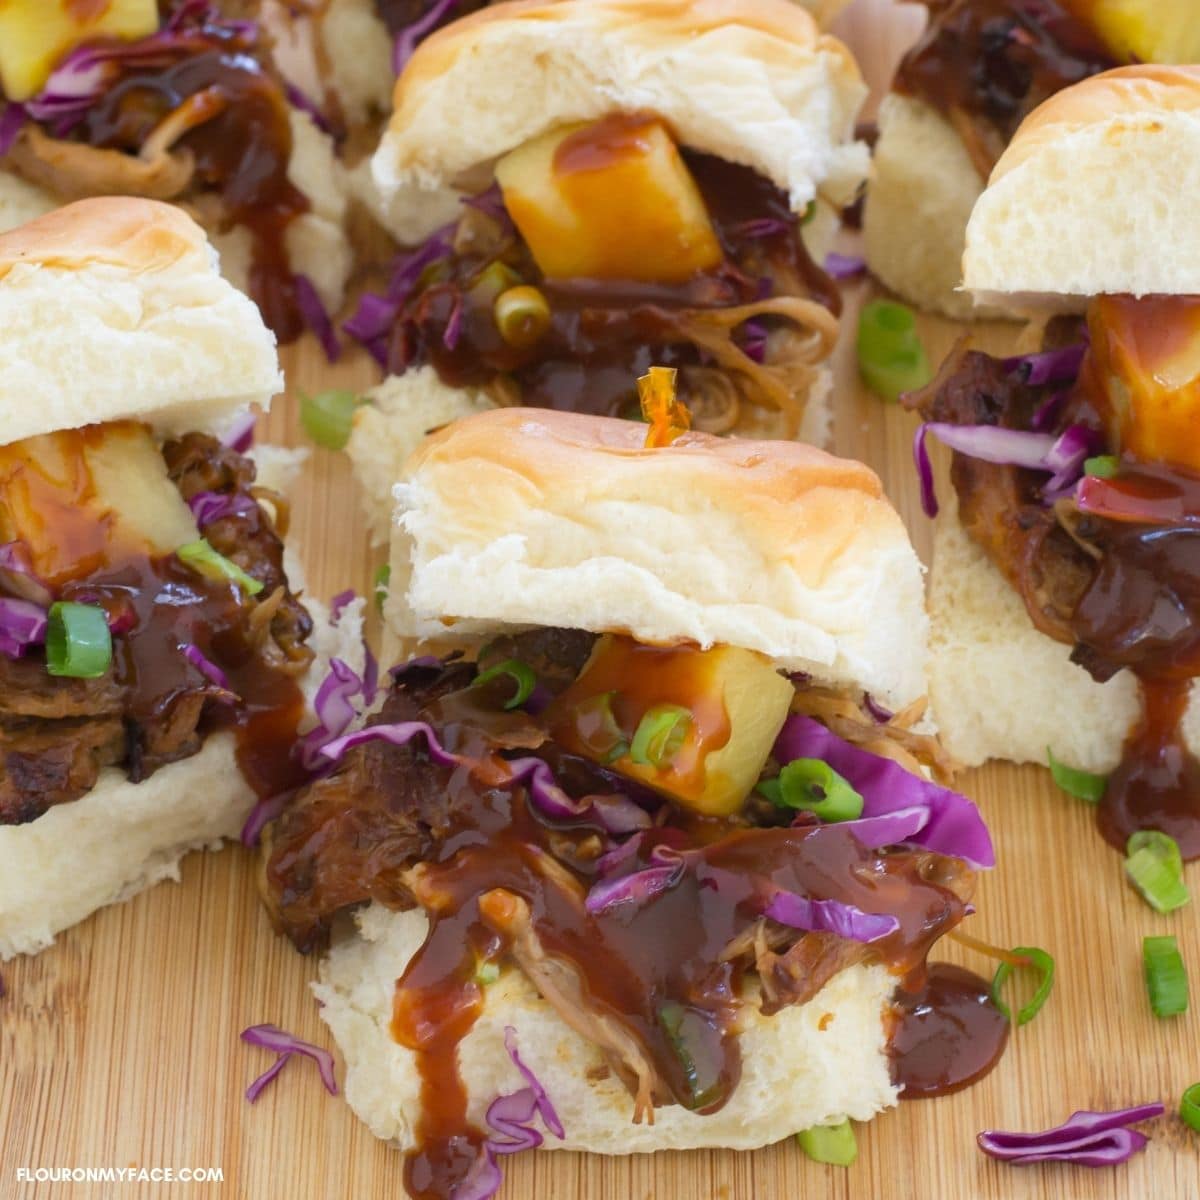 Pulled pork sliders topped with slaw on a cutting board.